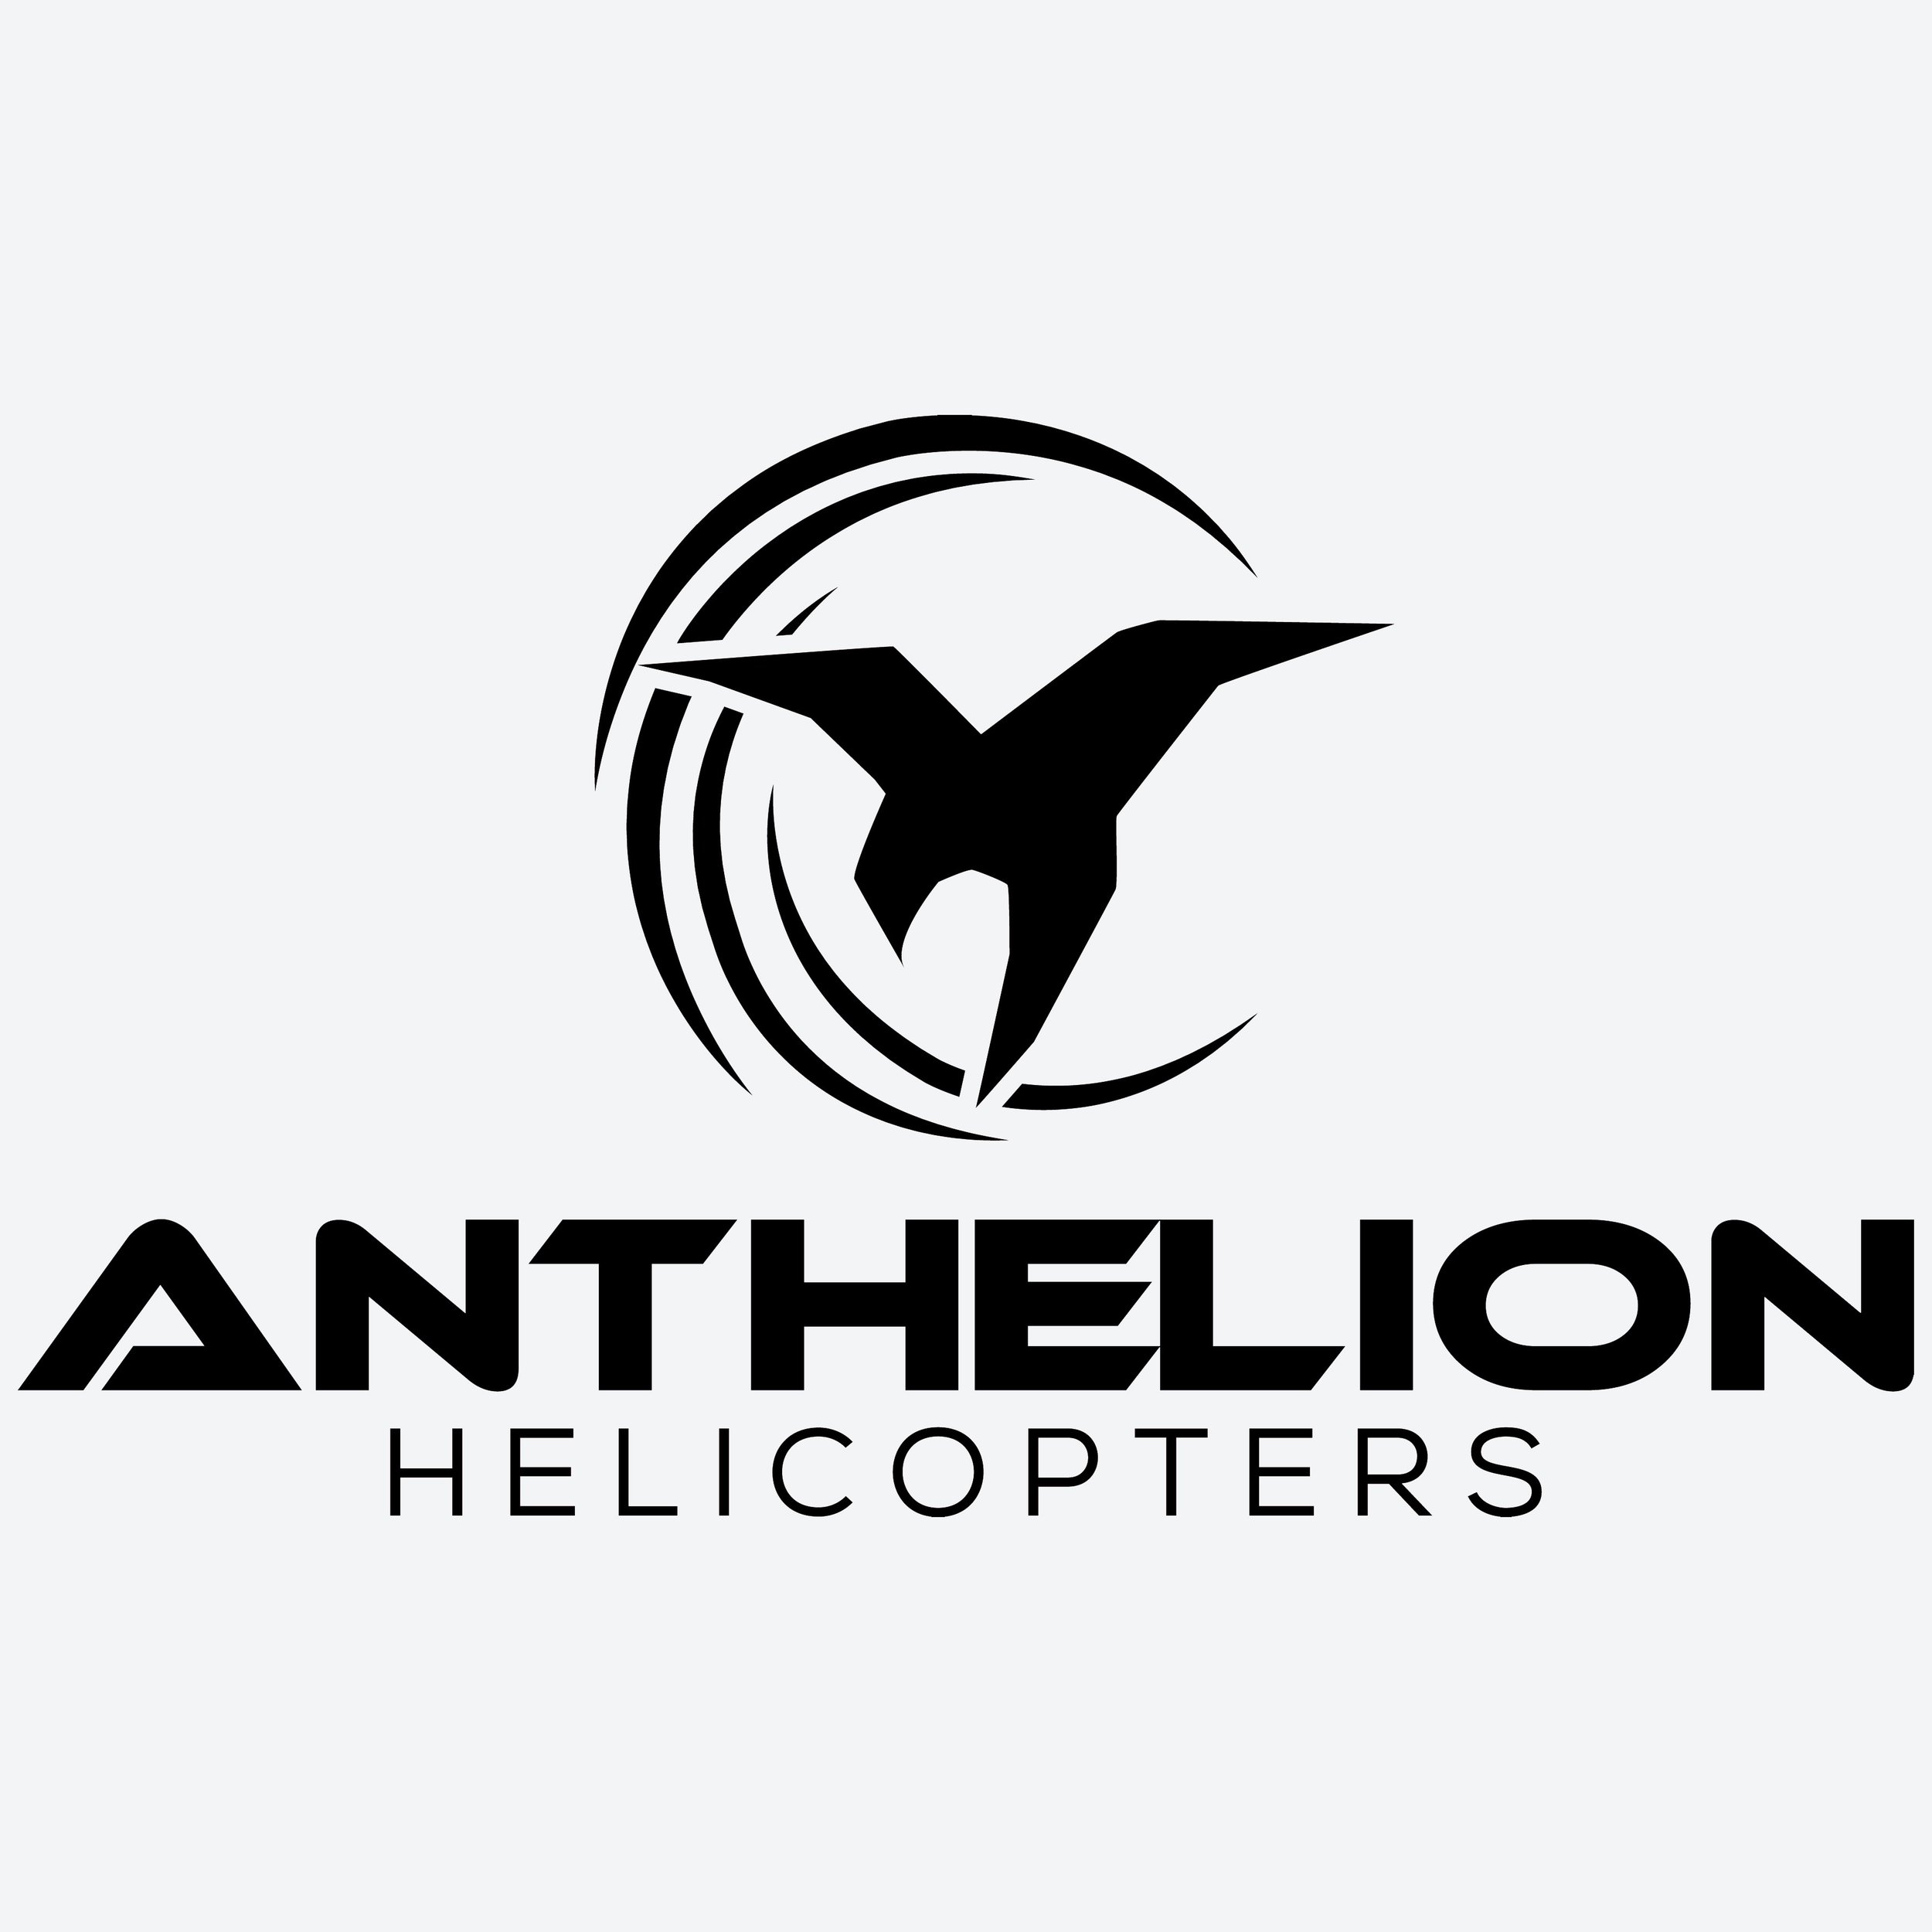 Anthelion_Helicopters_Logo_1X1.jpg